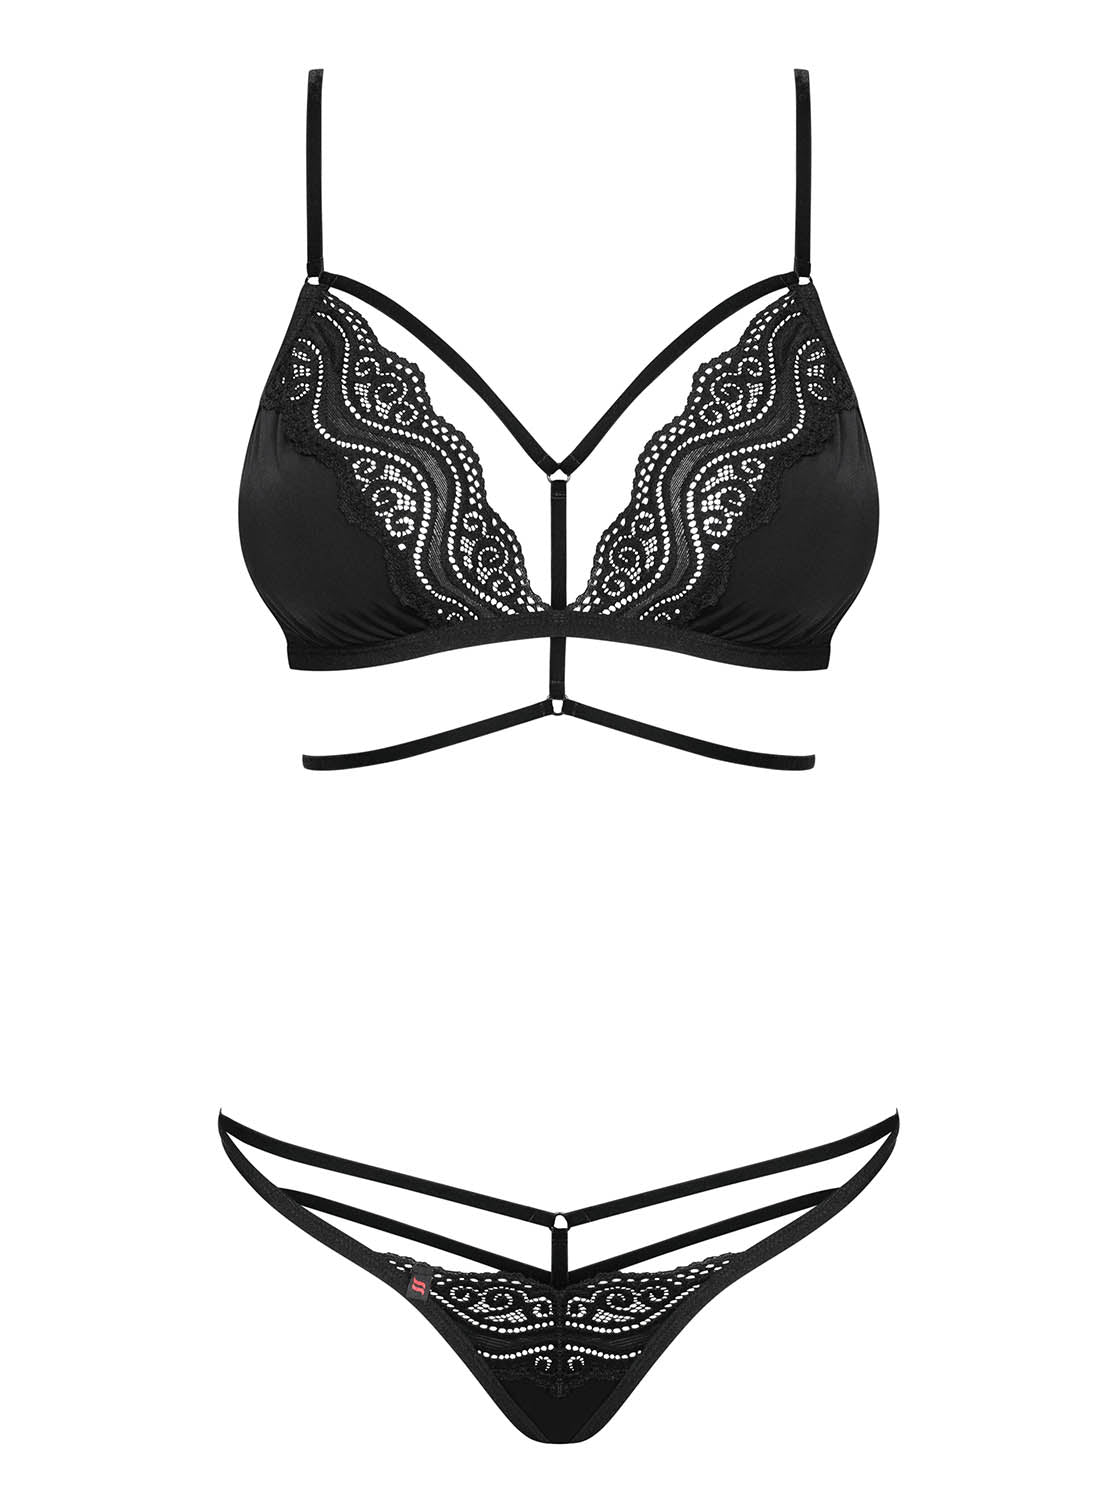 Diyosa a charming lingerie set consisting of a bra with elastic straps on the cleavage and belly and a matching lace thong